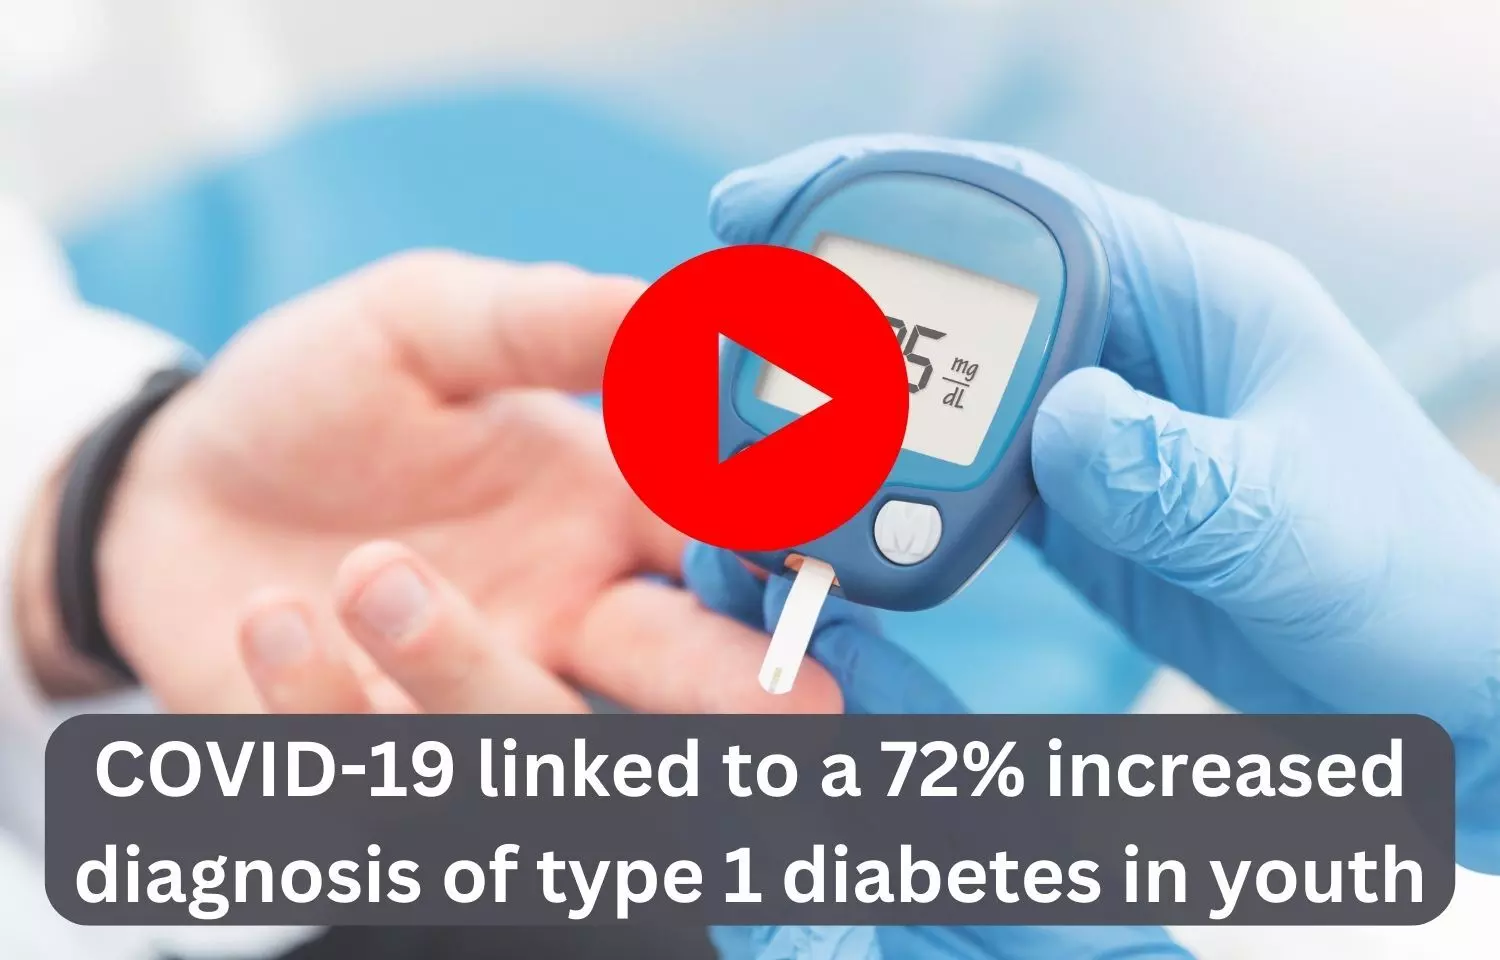 COVID-19 linked to a 72% increased diagnosis of type 1 diabetes in youth